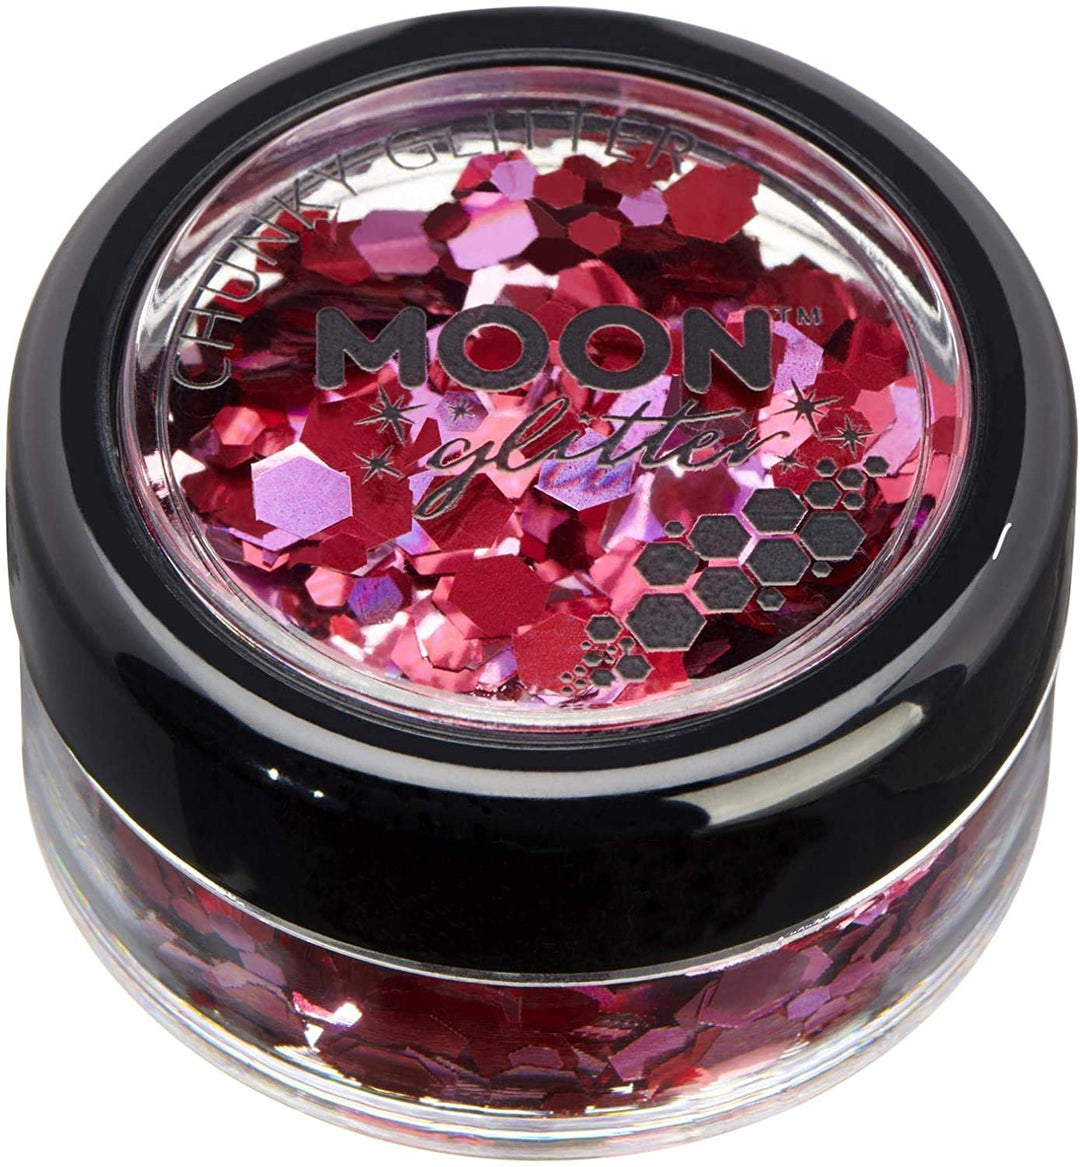 Mystic Chunky Glitter by Moon Glitter - Valentines - Cosmetic Festival Makeup Glitter for Face, Body, Nails, Hair, Lips - 3g